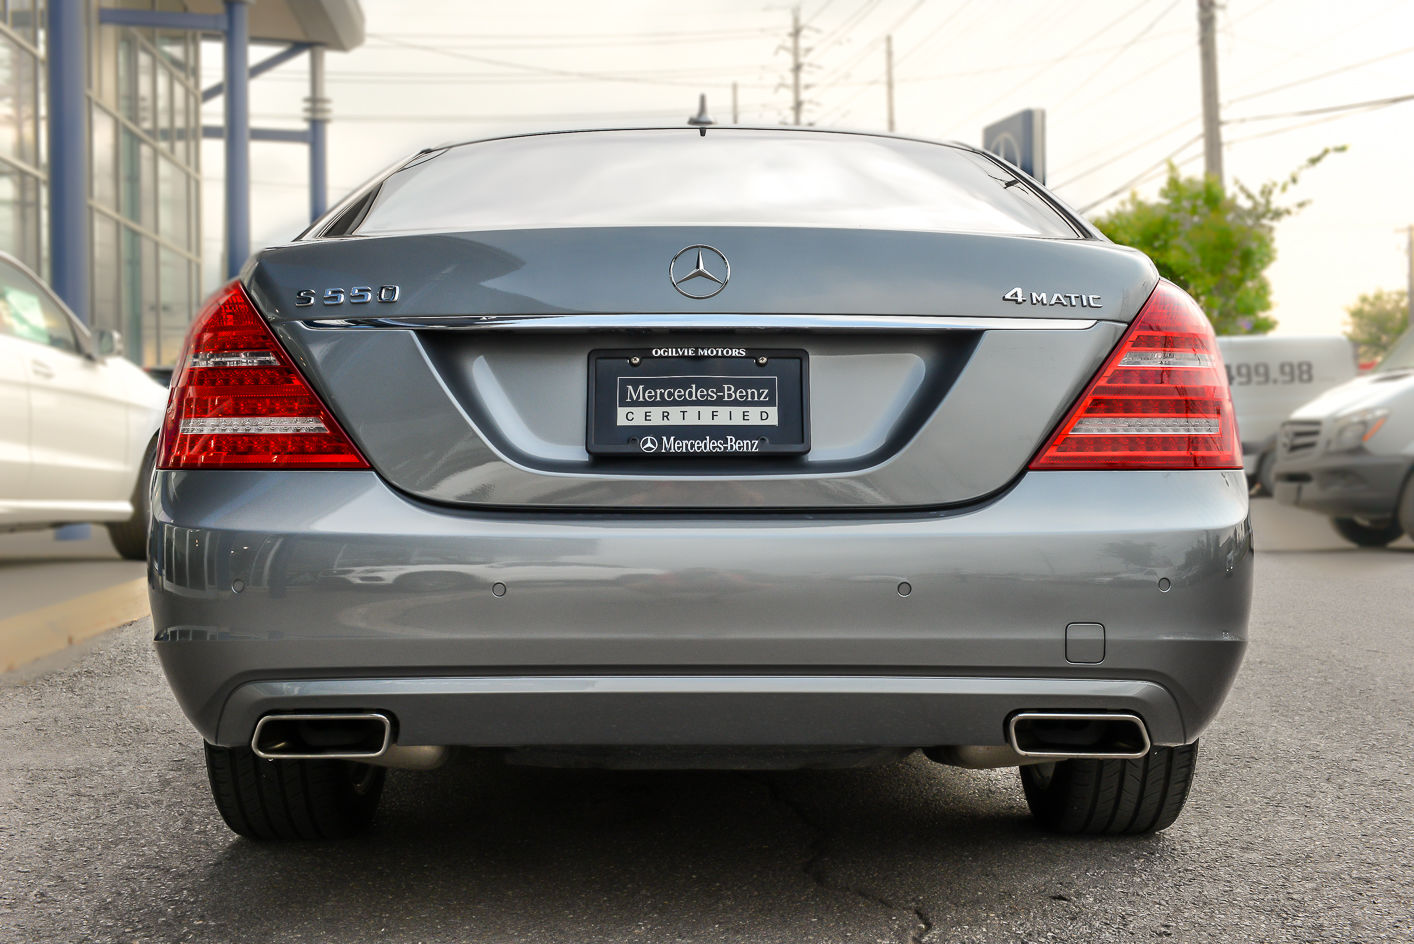 Pre-owned mercedes benz s550 4matic #7